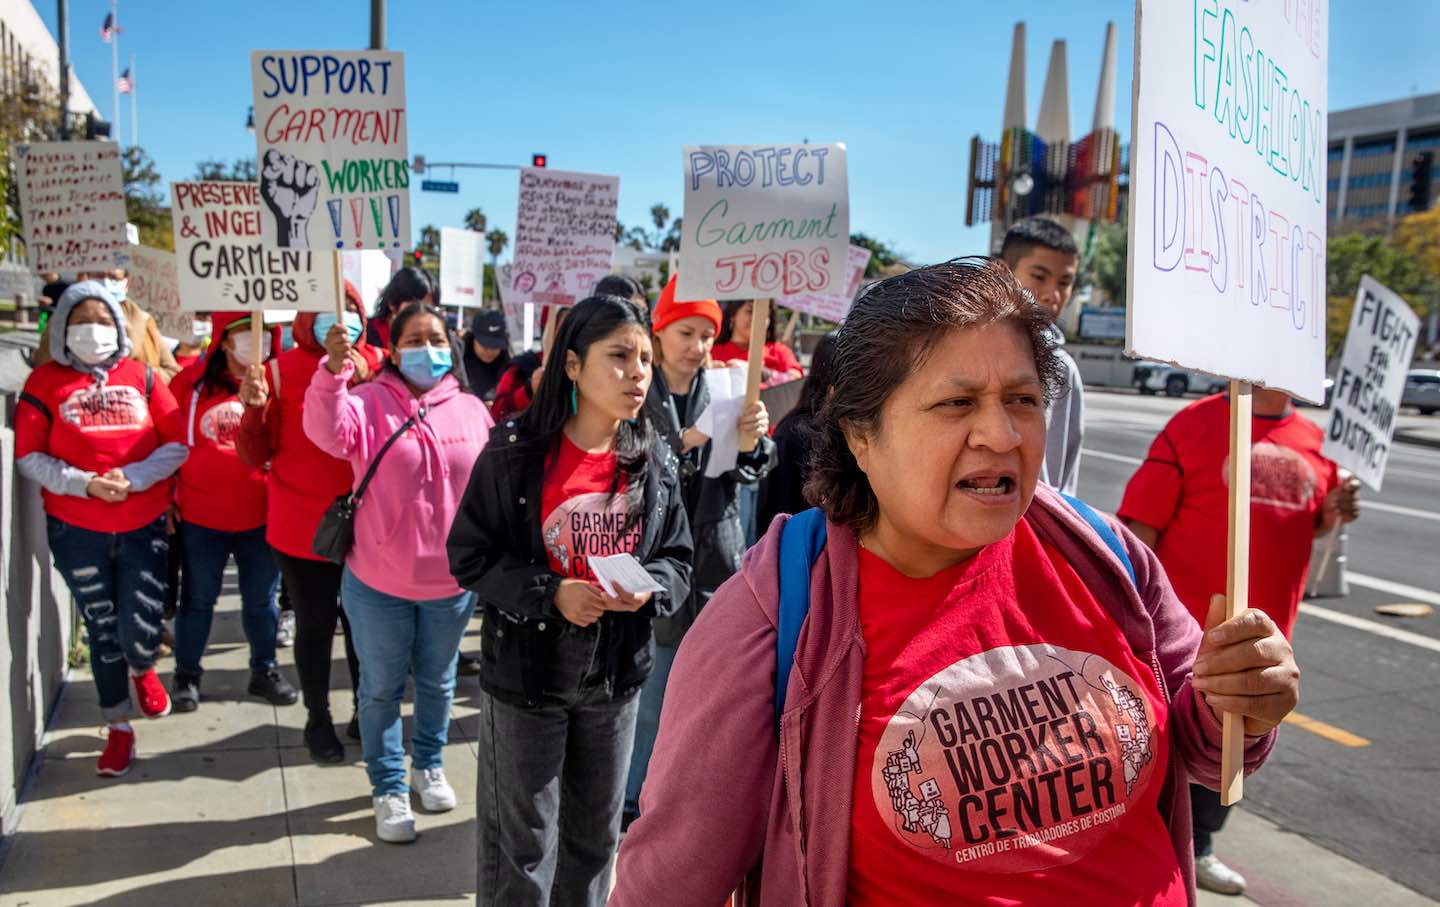 Garment workers rally at Los Angeles City Hall.